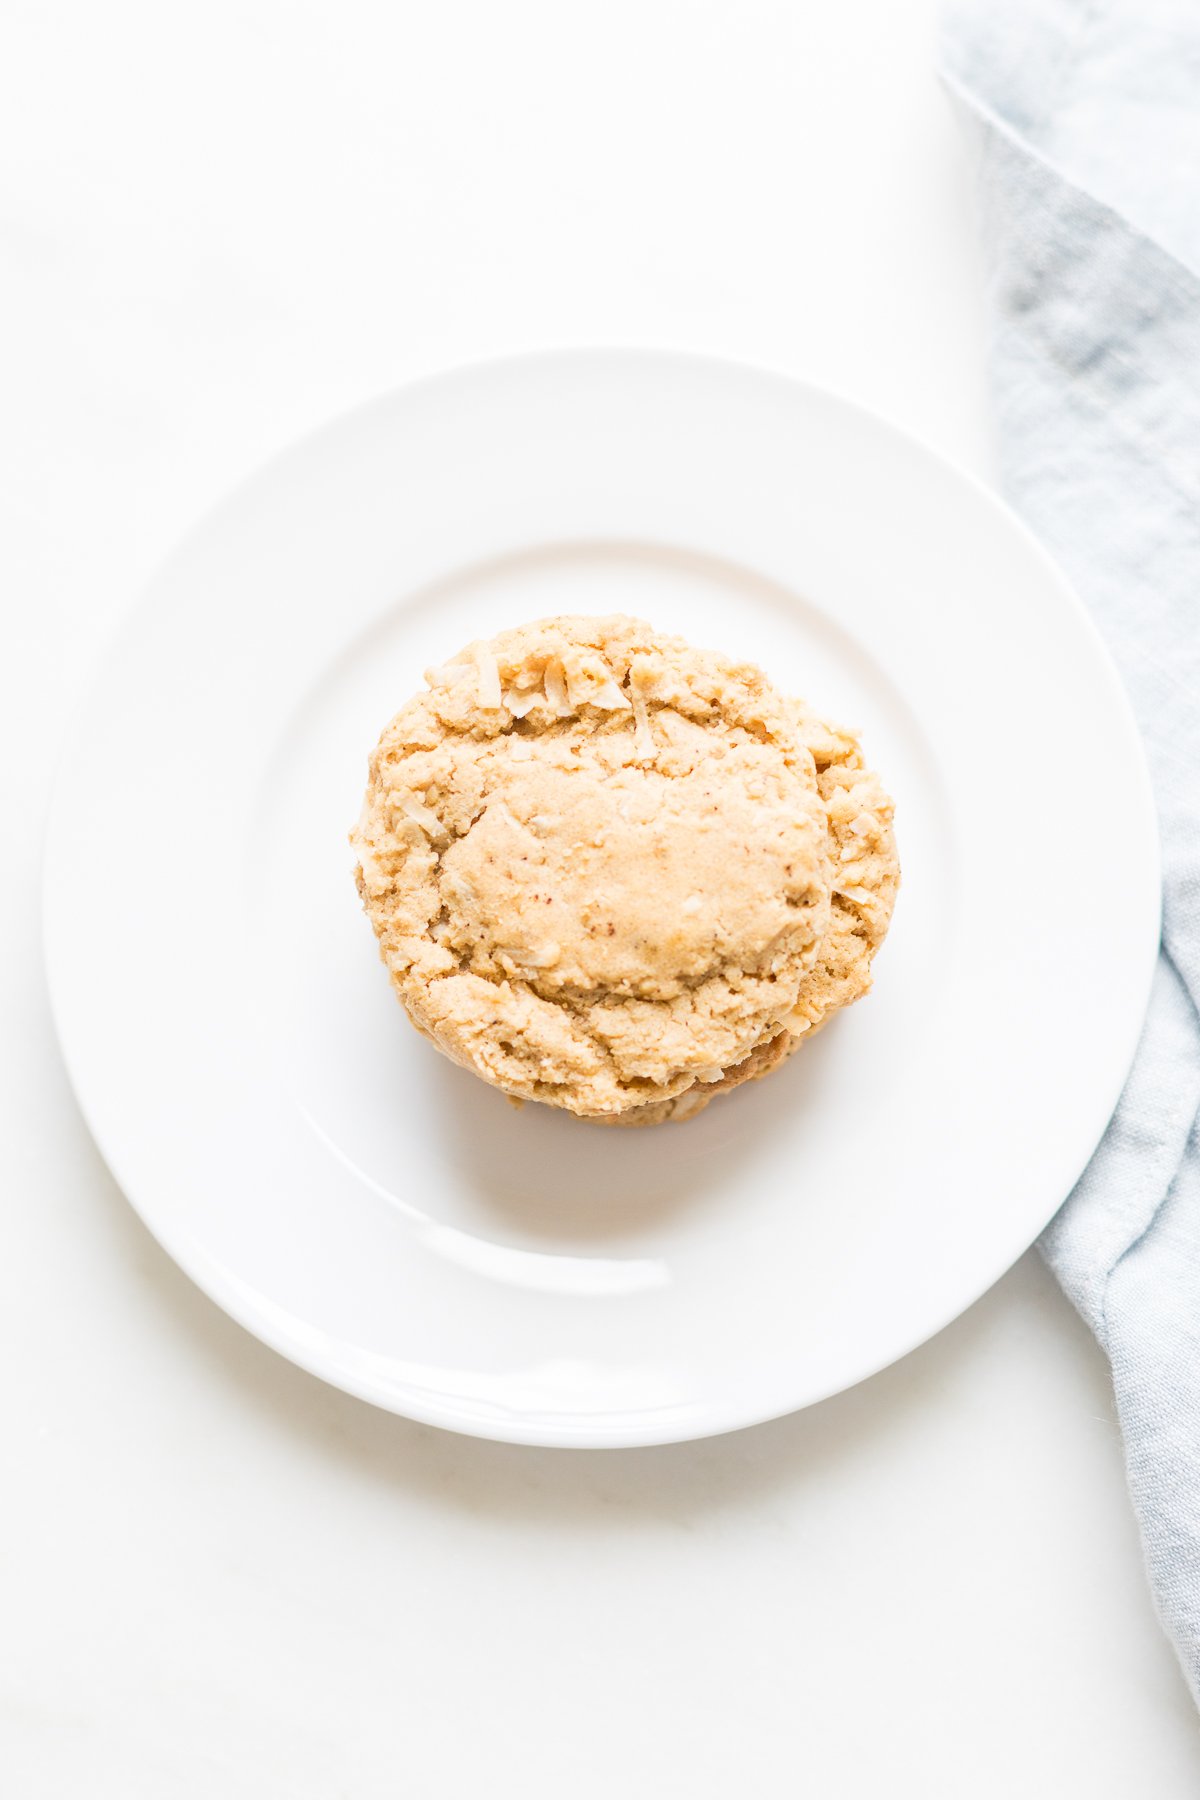 An oatmeal coconut cookie on a white plate.